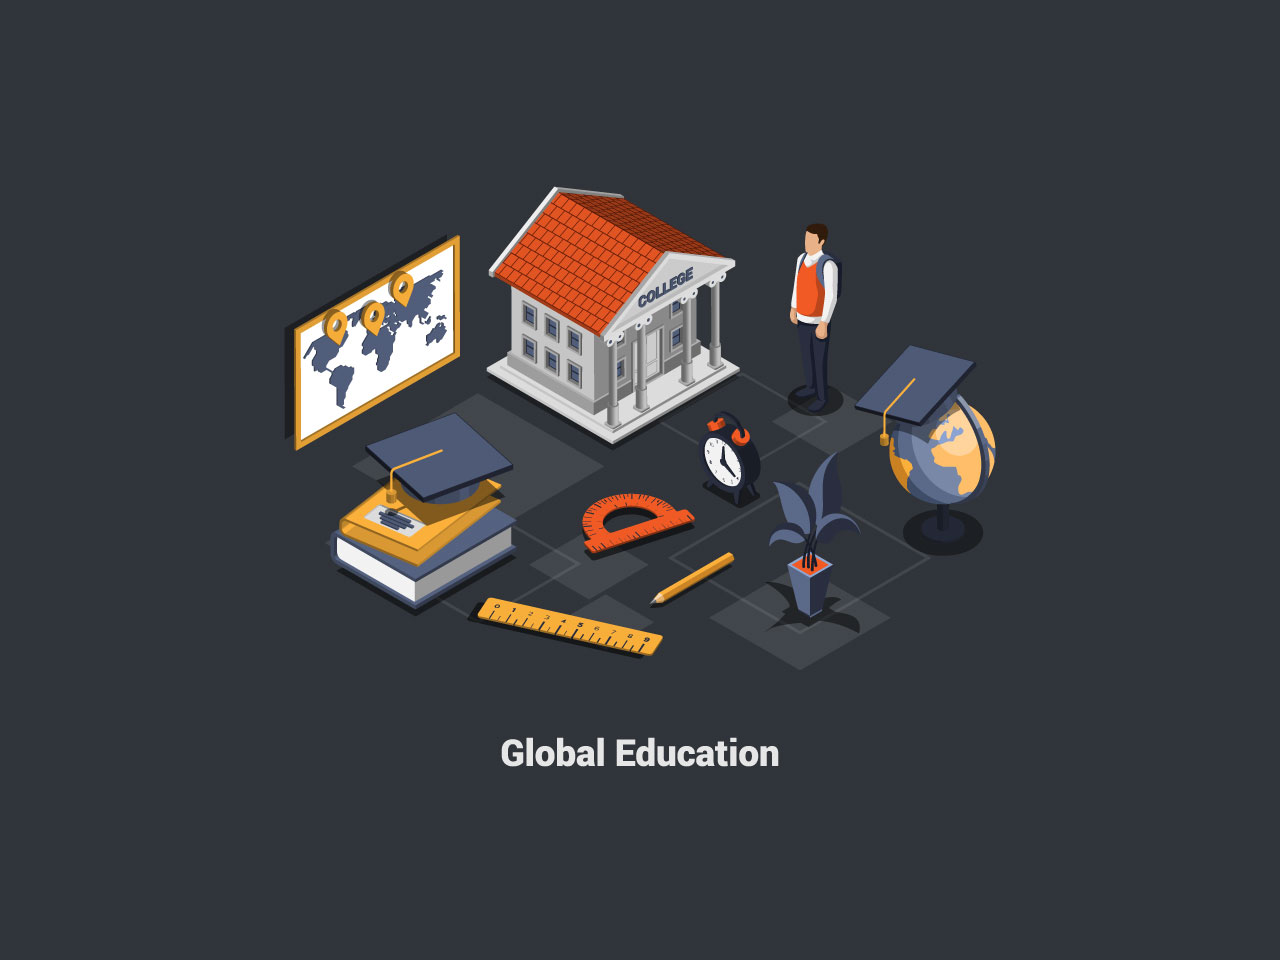 Global education program concept boy student with backpack near stack books alarm clock globe world map college building internet education course degree isometric 3d illustration